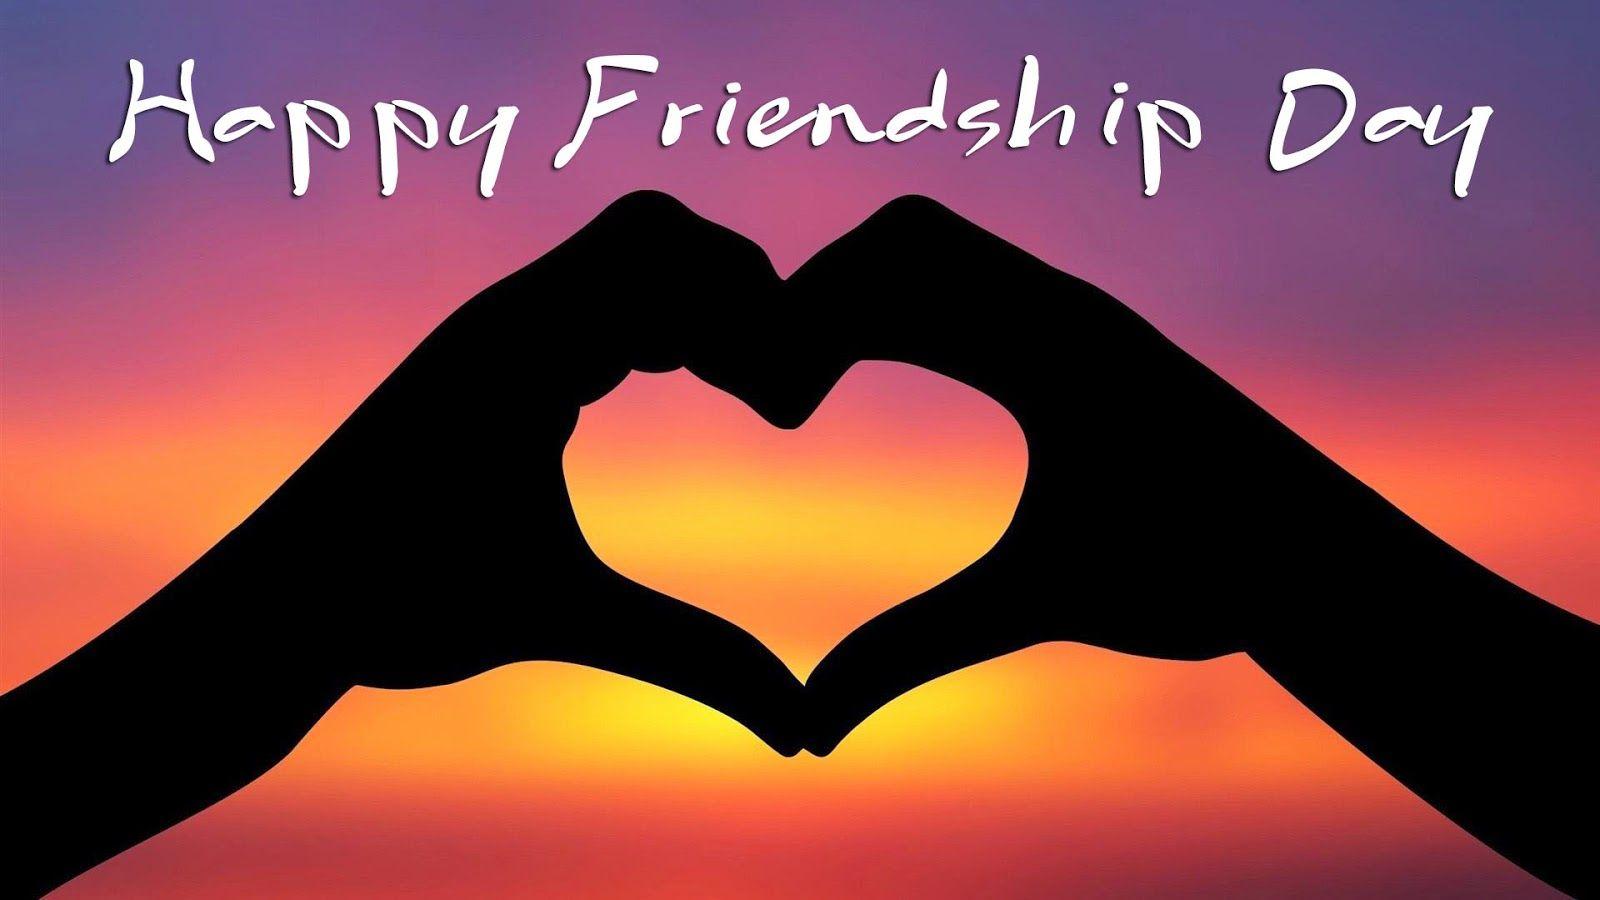 Happy Friendship Day 2018 Image Quotes Wishes Messages Sayings Status